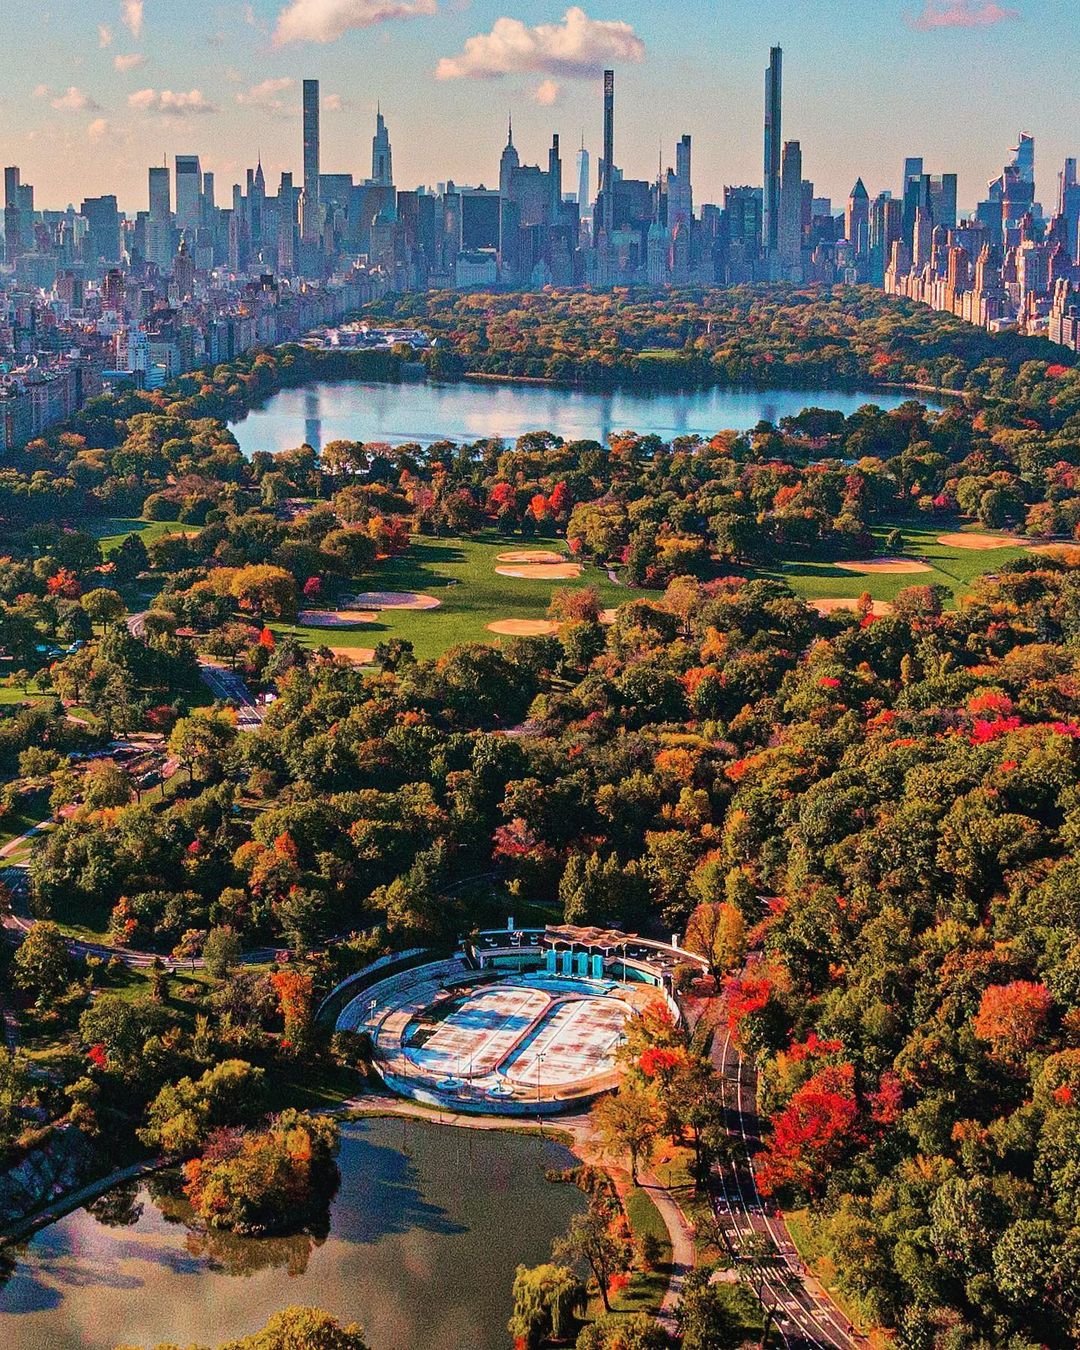 Aerial View of Central Park in Fall in New York City, NY. Photo by Instagram user @mingomatic